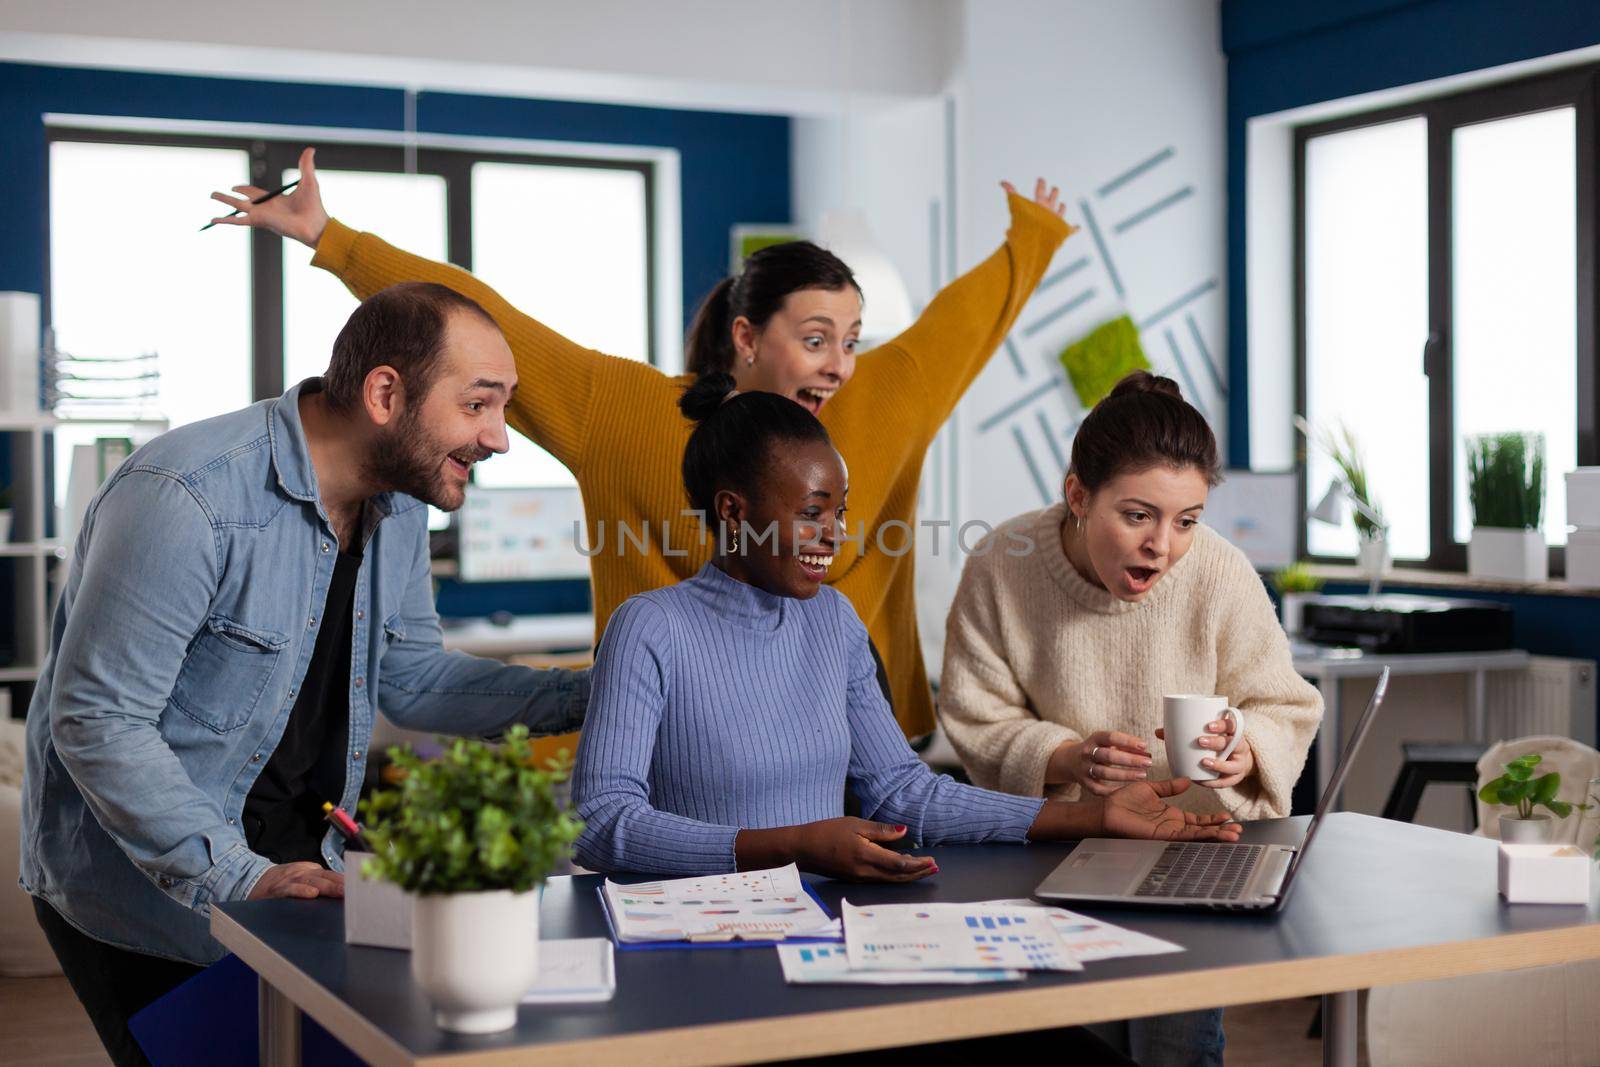 Diverse startup coworkers entrepreneurs celebrating triump with hands up lin modern office. Multiethnic business team with laptop and papers excited about project.